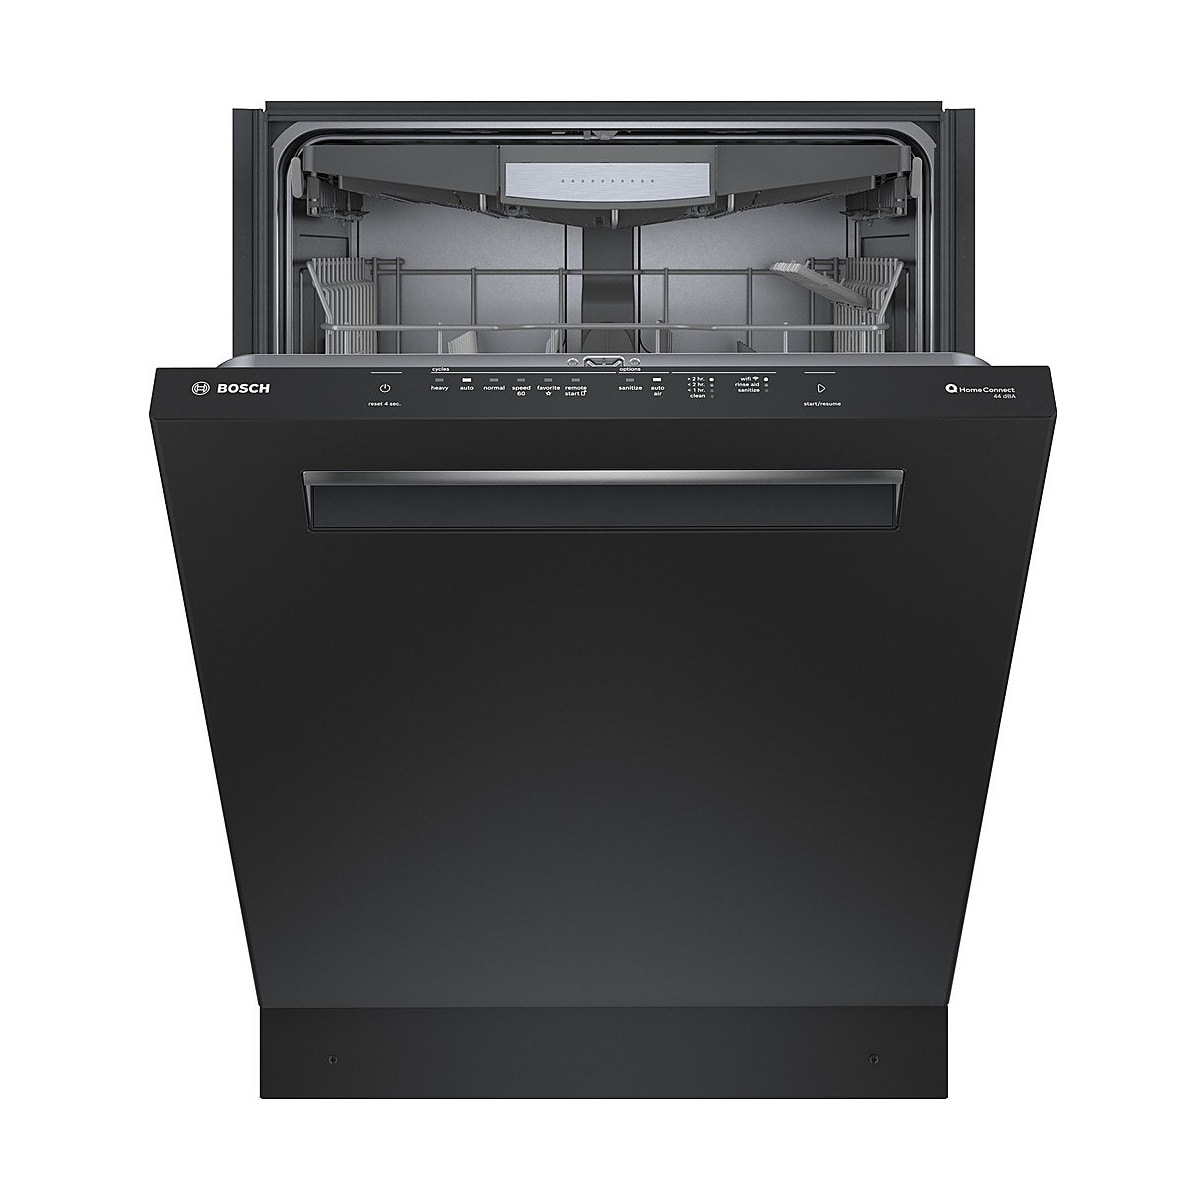 Bosch dishwasher hums but no water